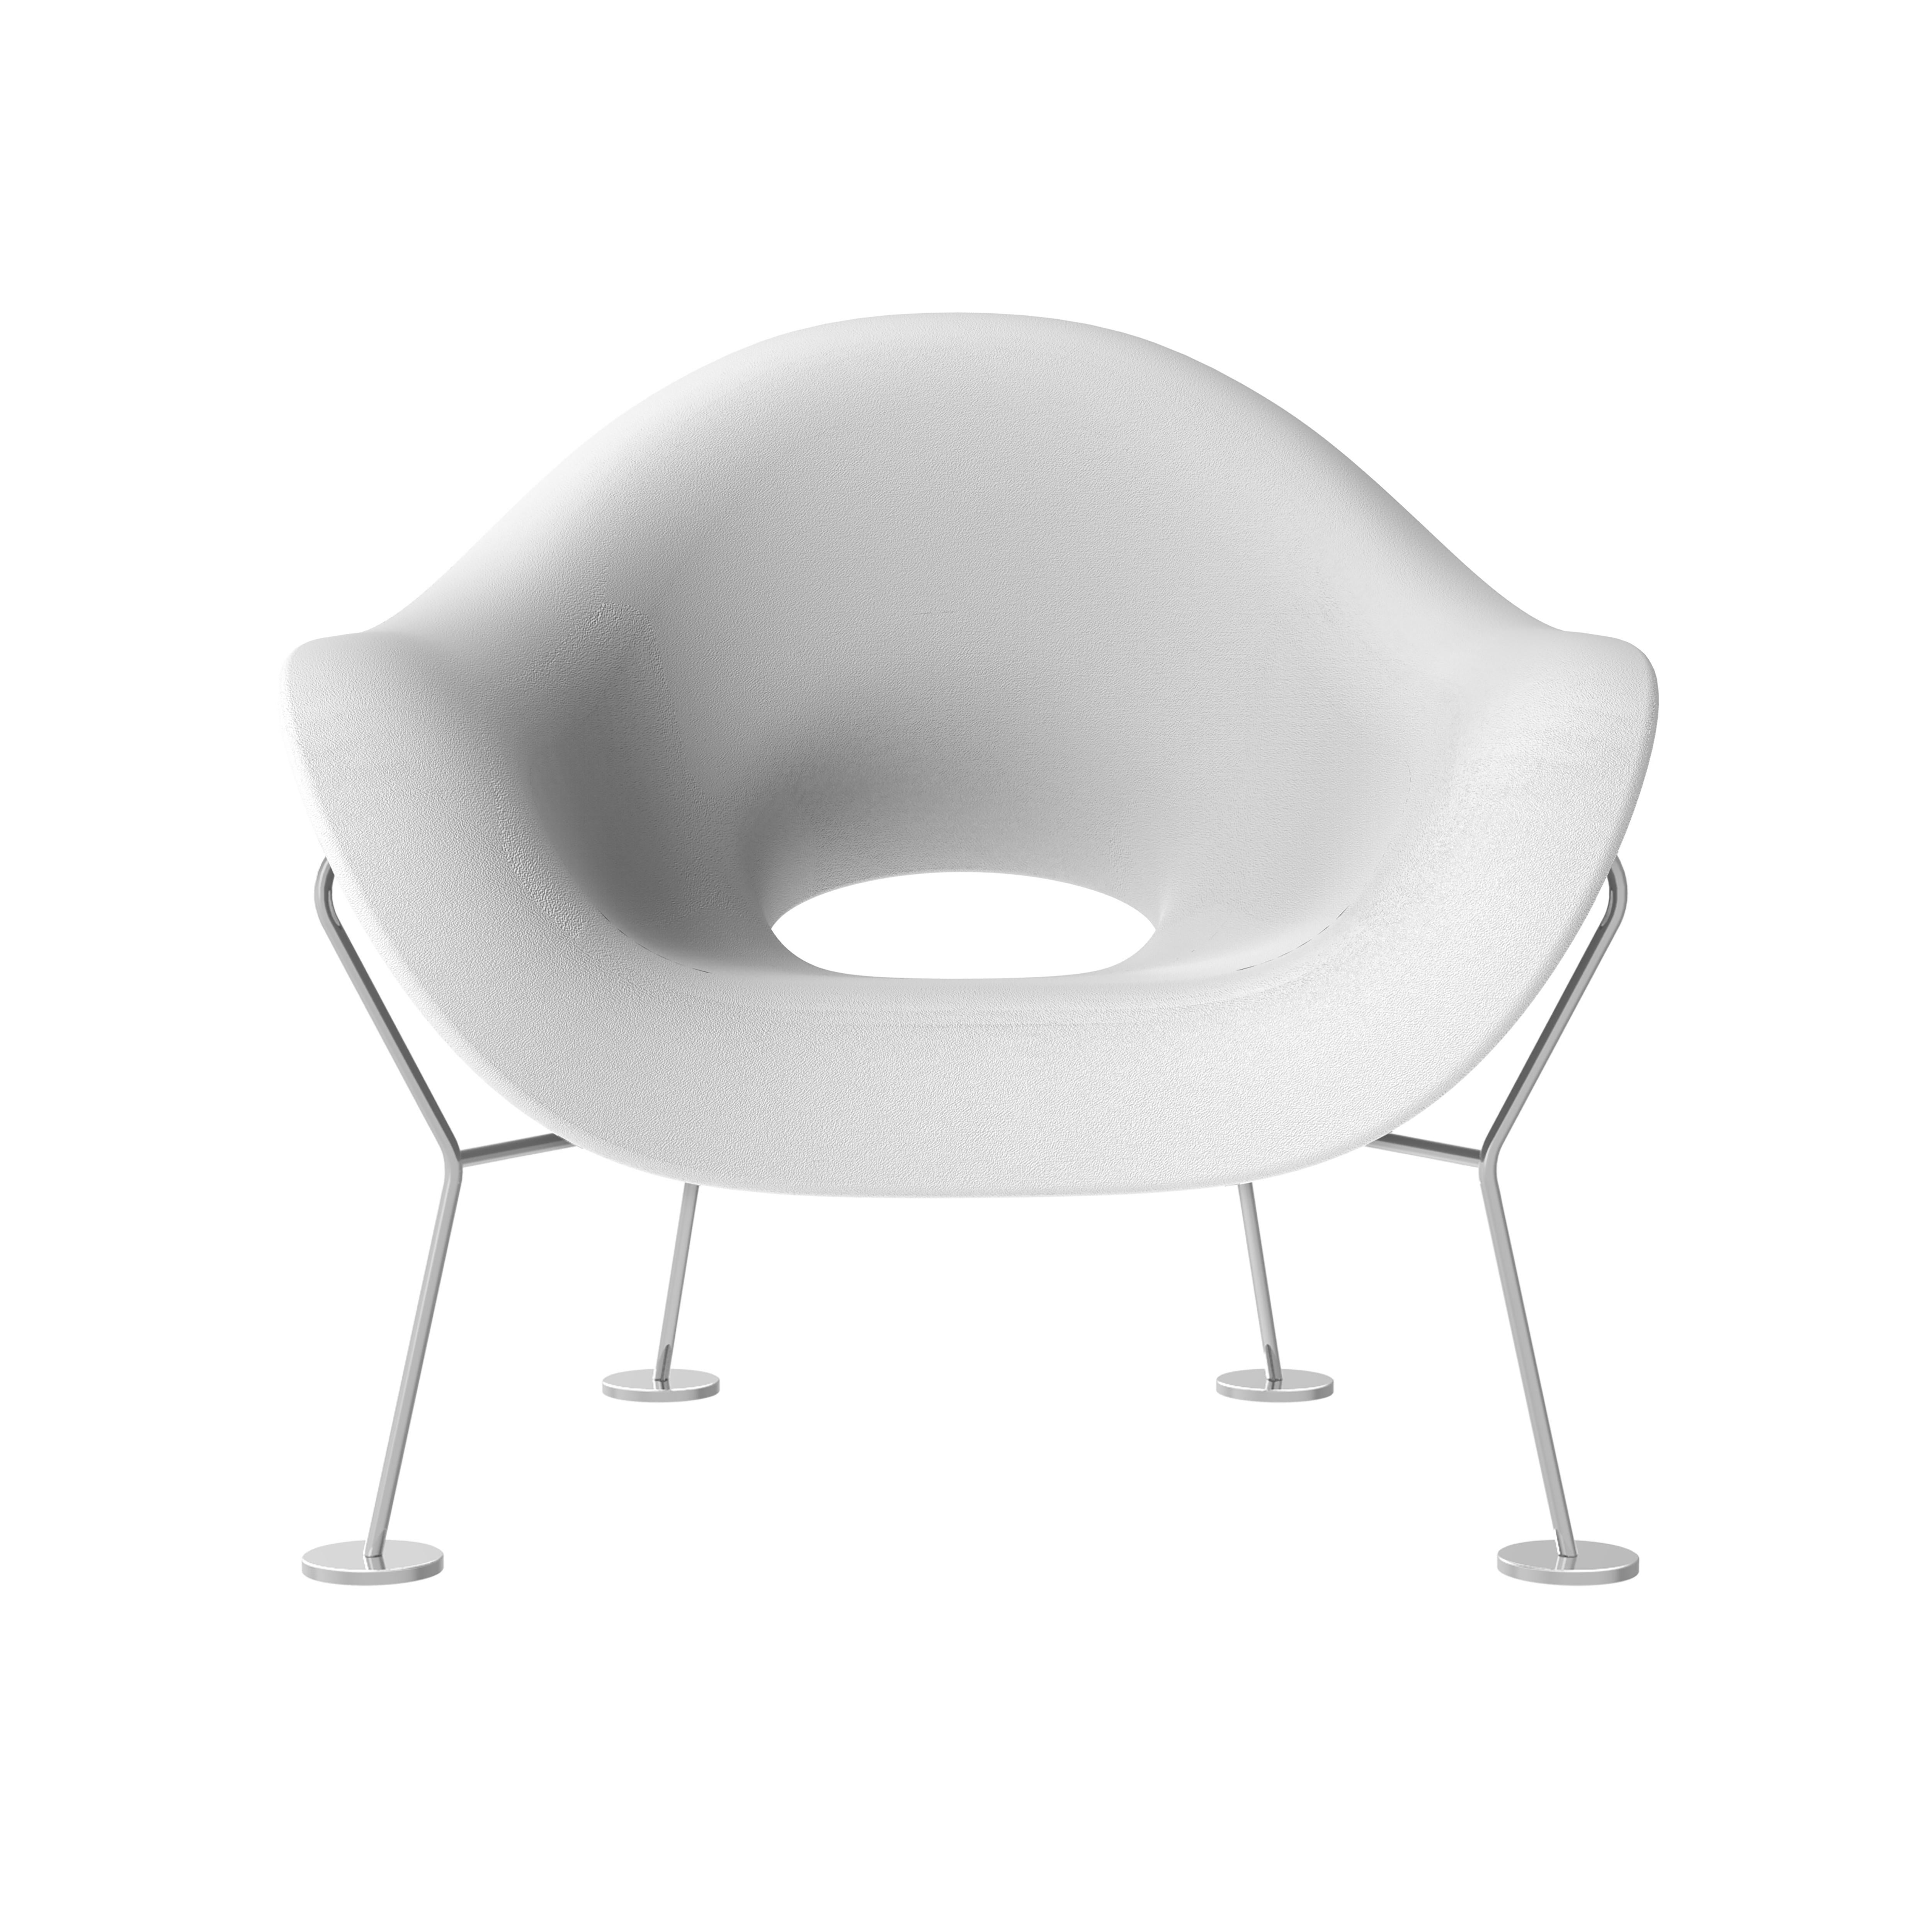 For Sale: White Plush Modern Black Side or Arm Chair with Chrome Legs by Andrea Branzi